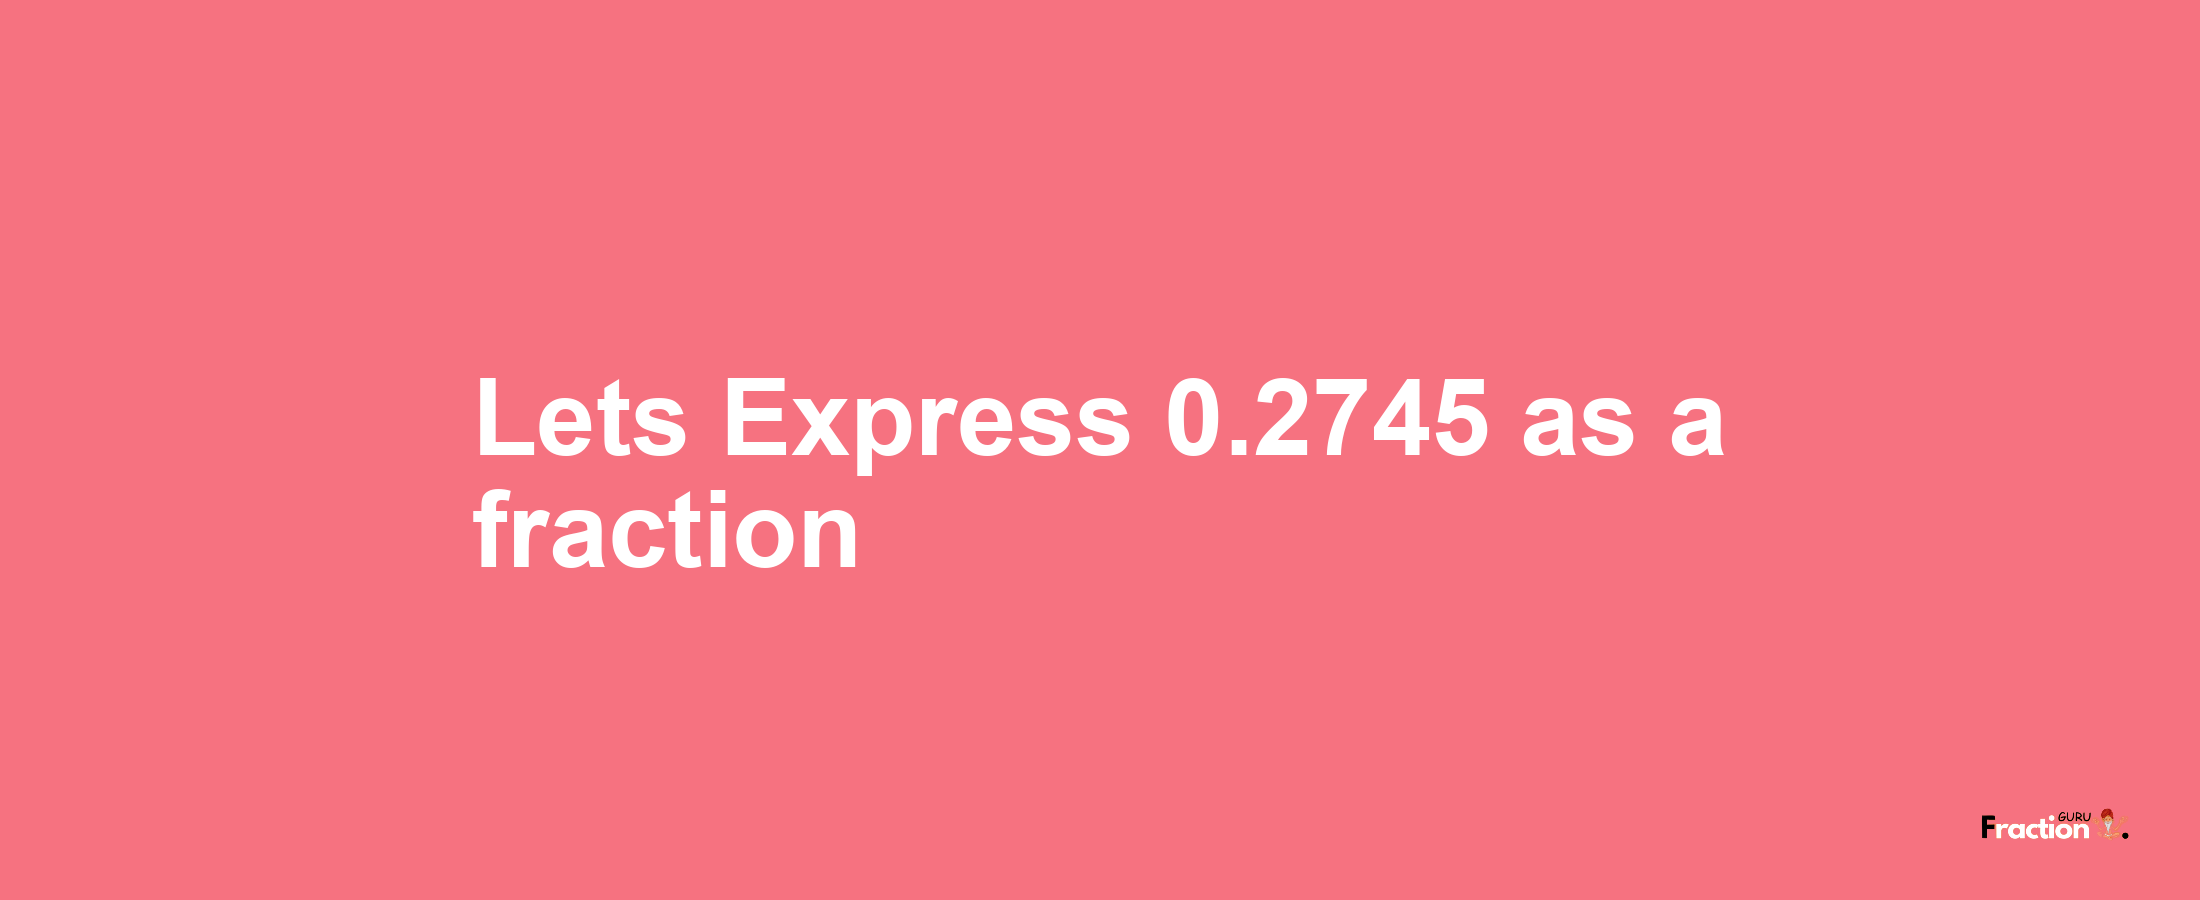 Lets Express 0.2745 as afraction